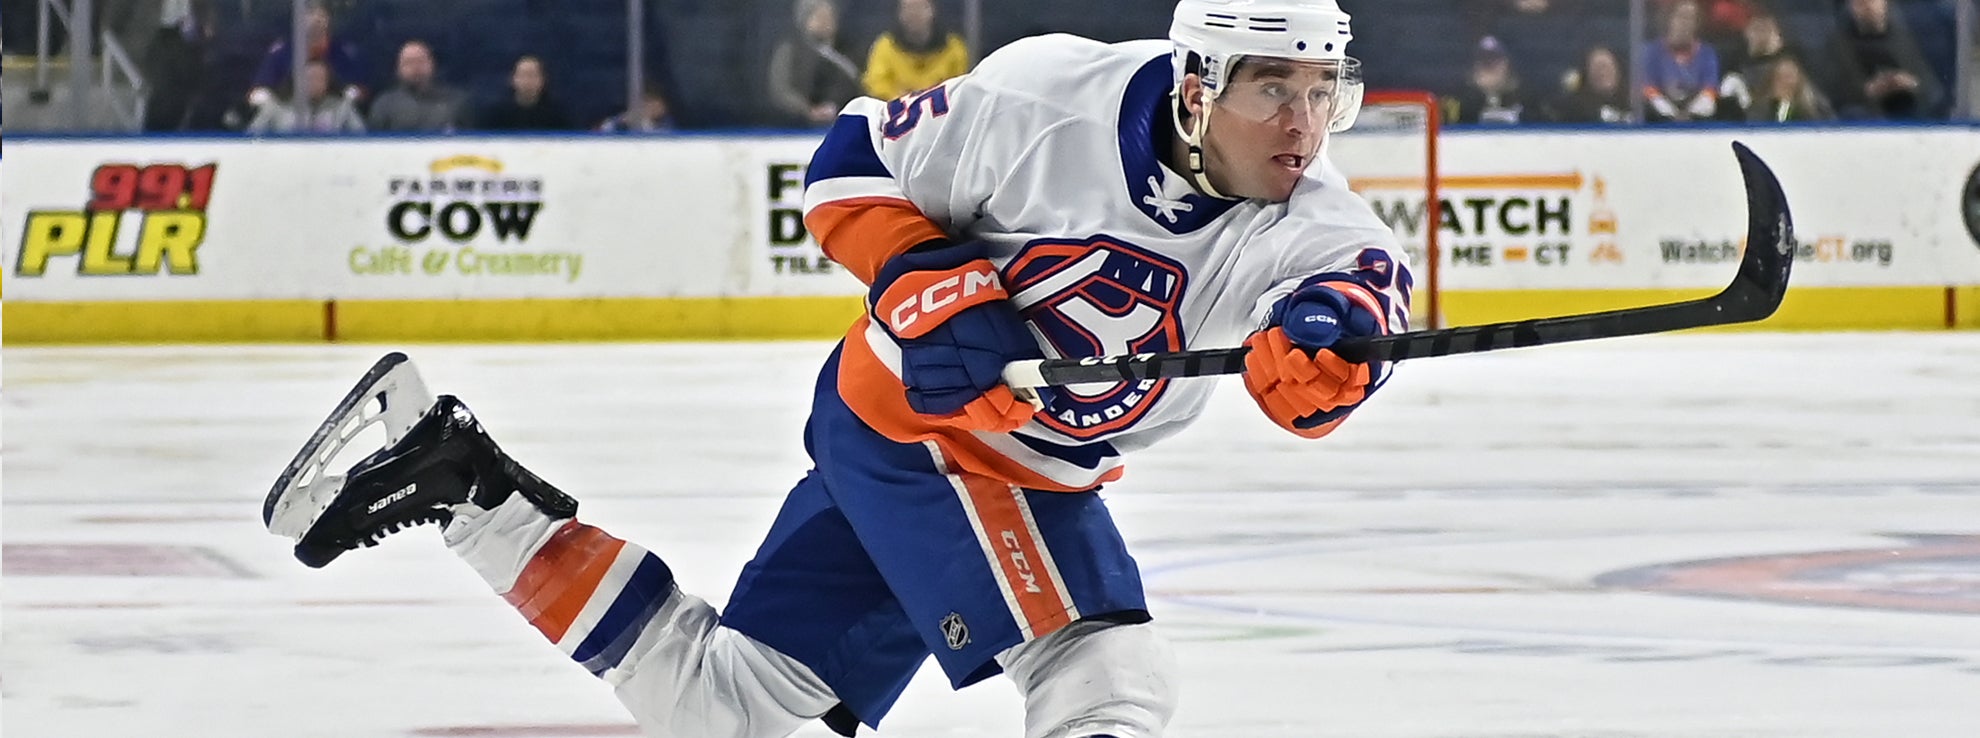 Terry Named AHL Player of the Week